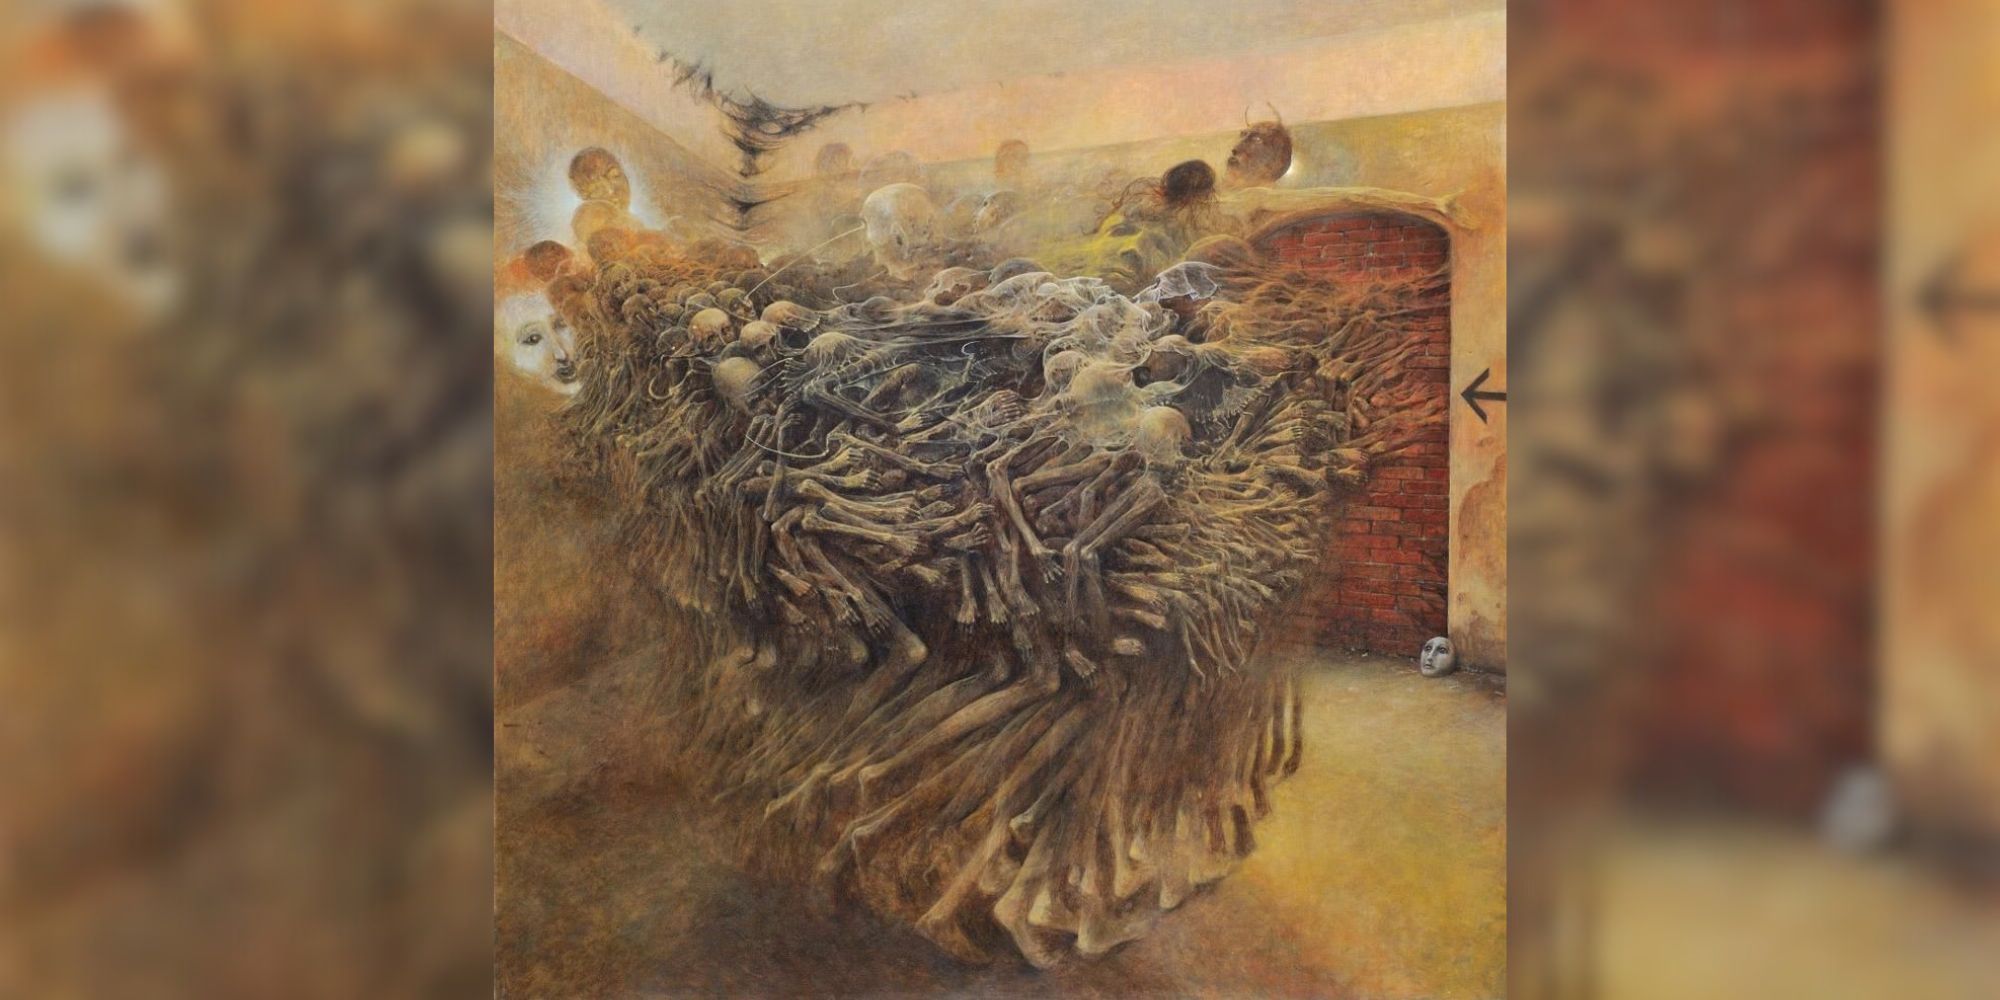 Screenshot of a Zdzisław Beksiński painting showing a cluster of skeletal bodies in the middle of a room.